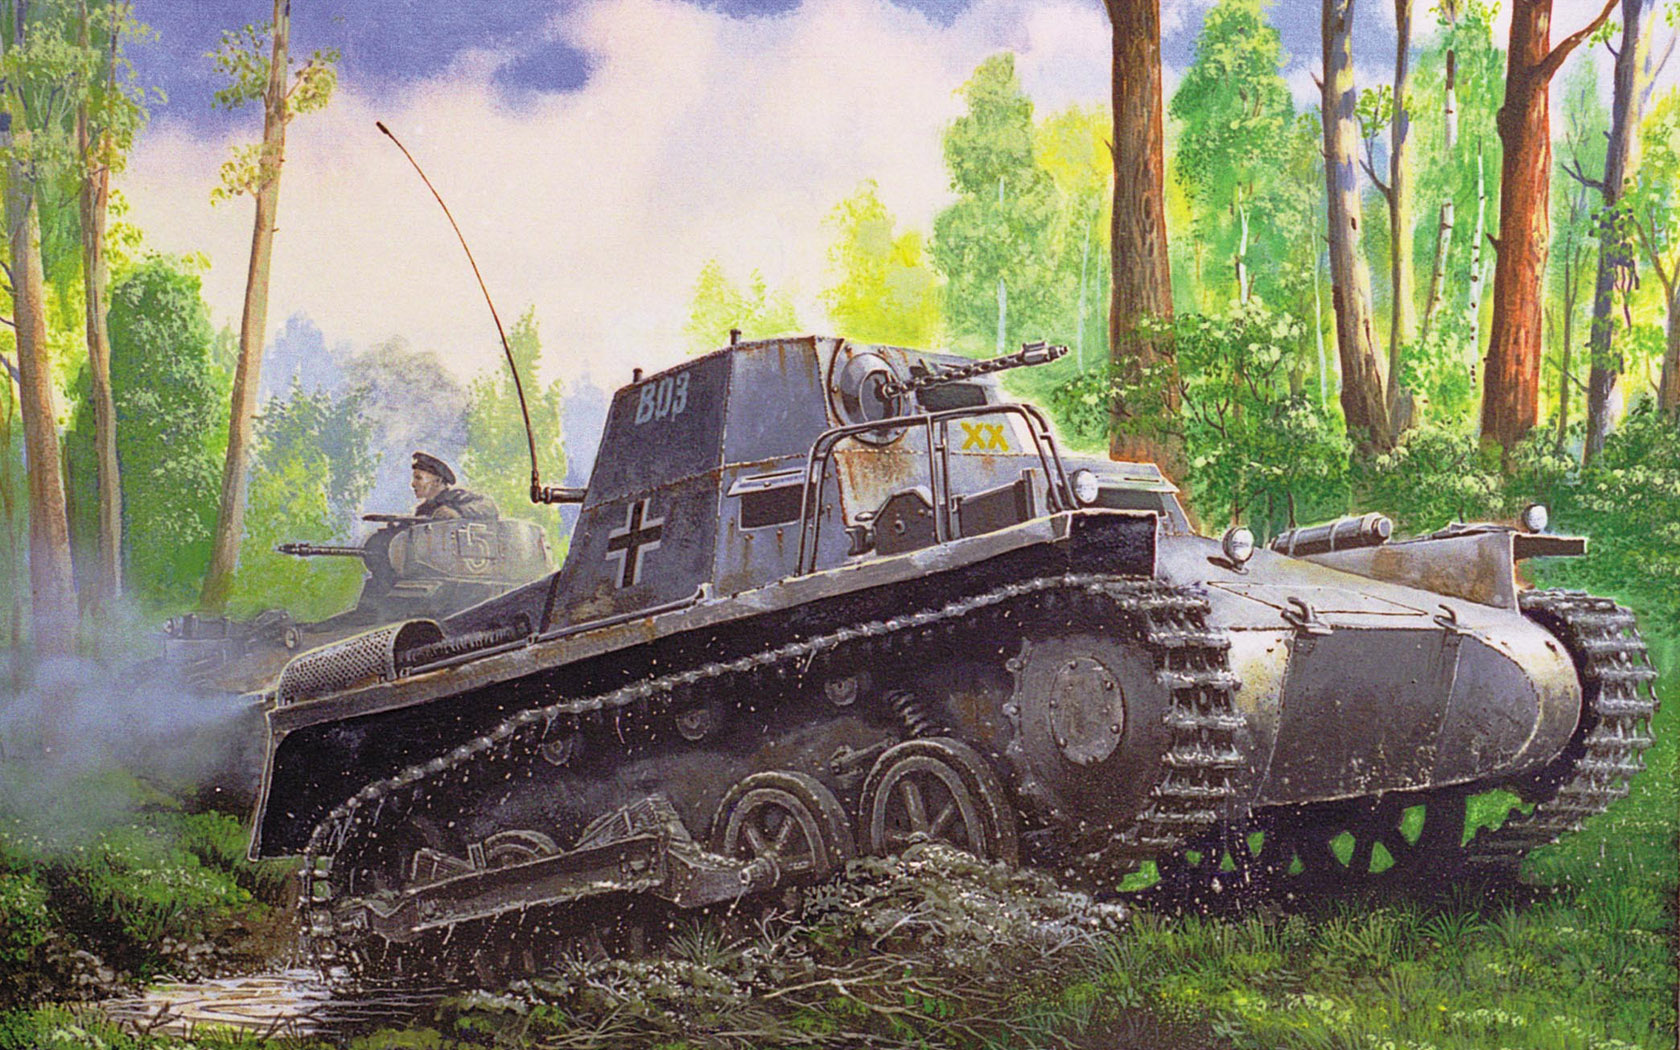 General 1680x1050 tank army military military vehicle artwork soldier hat trees clouds German tanks